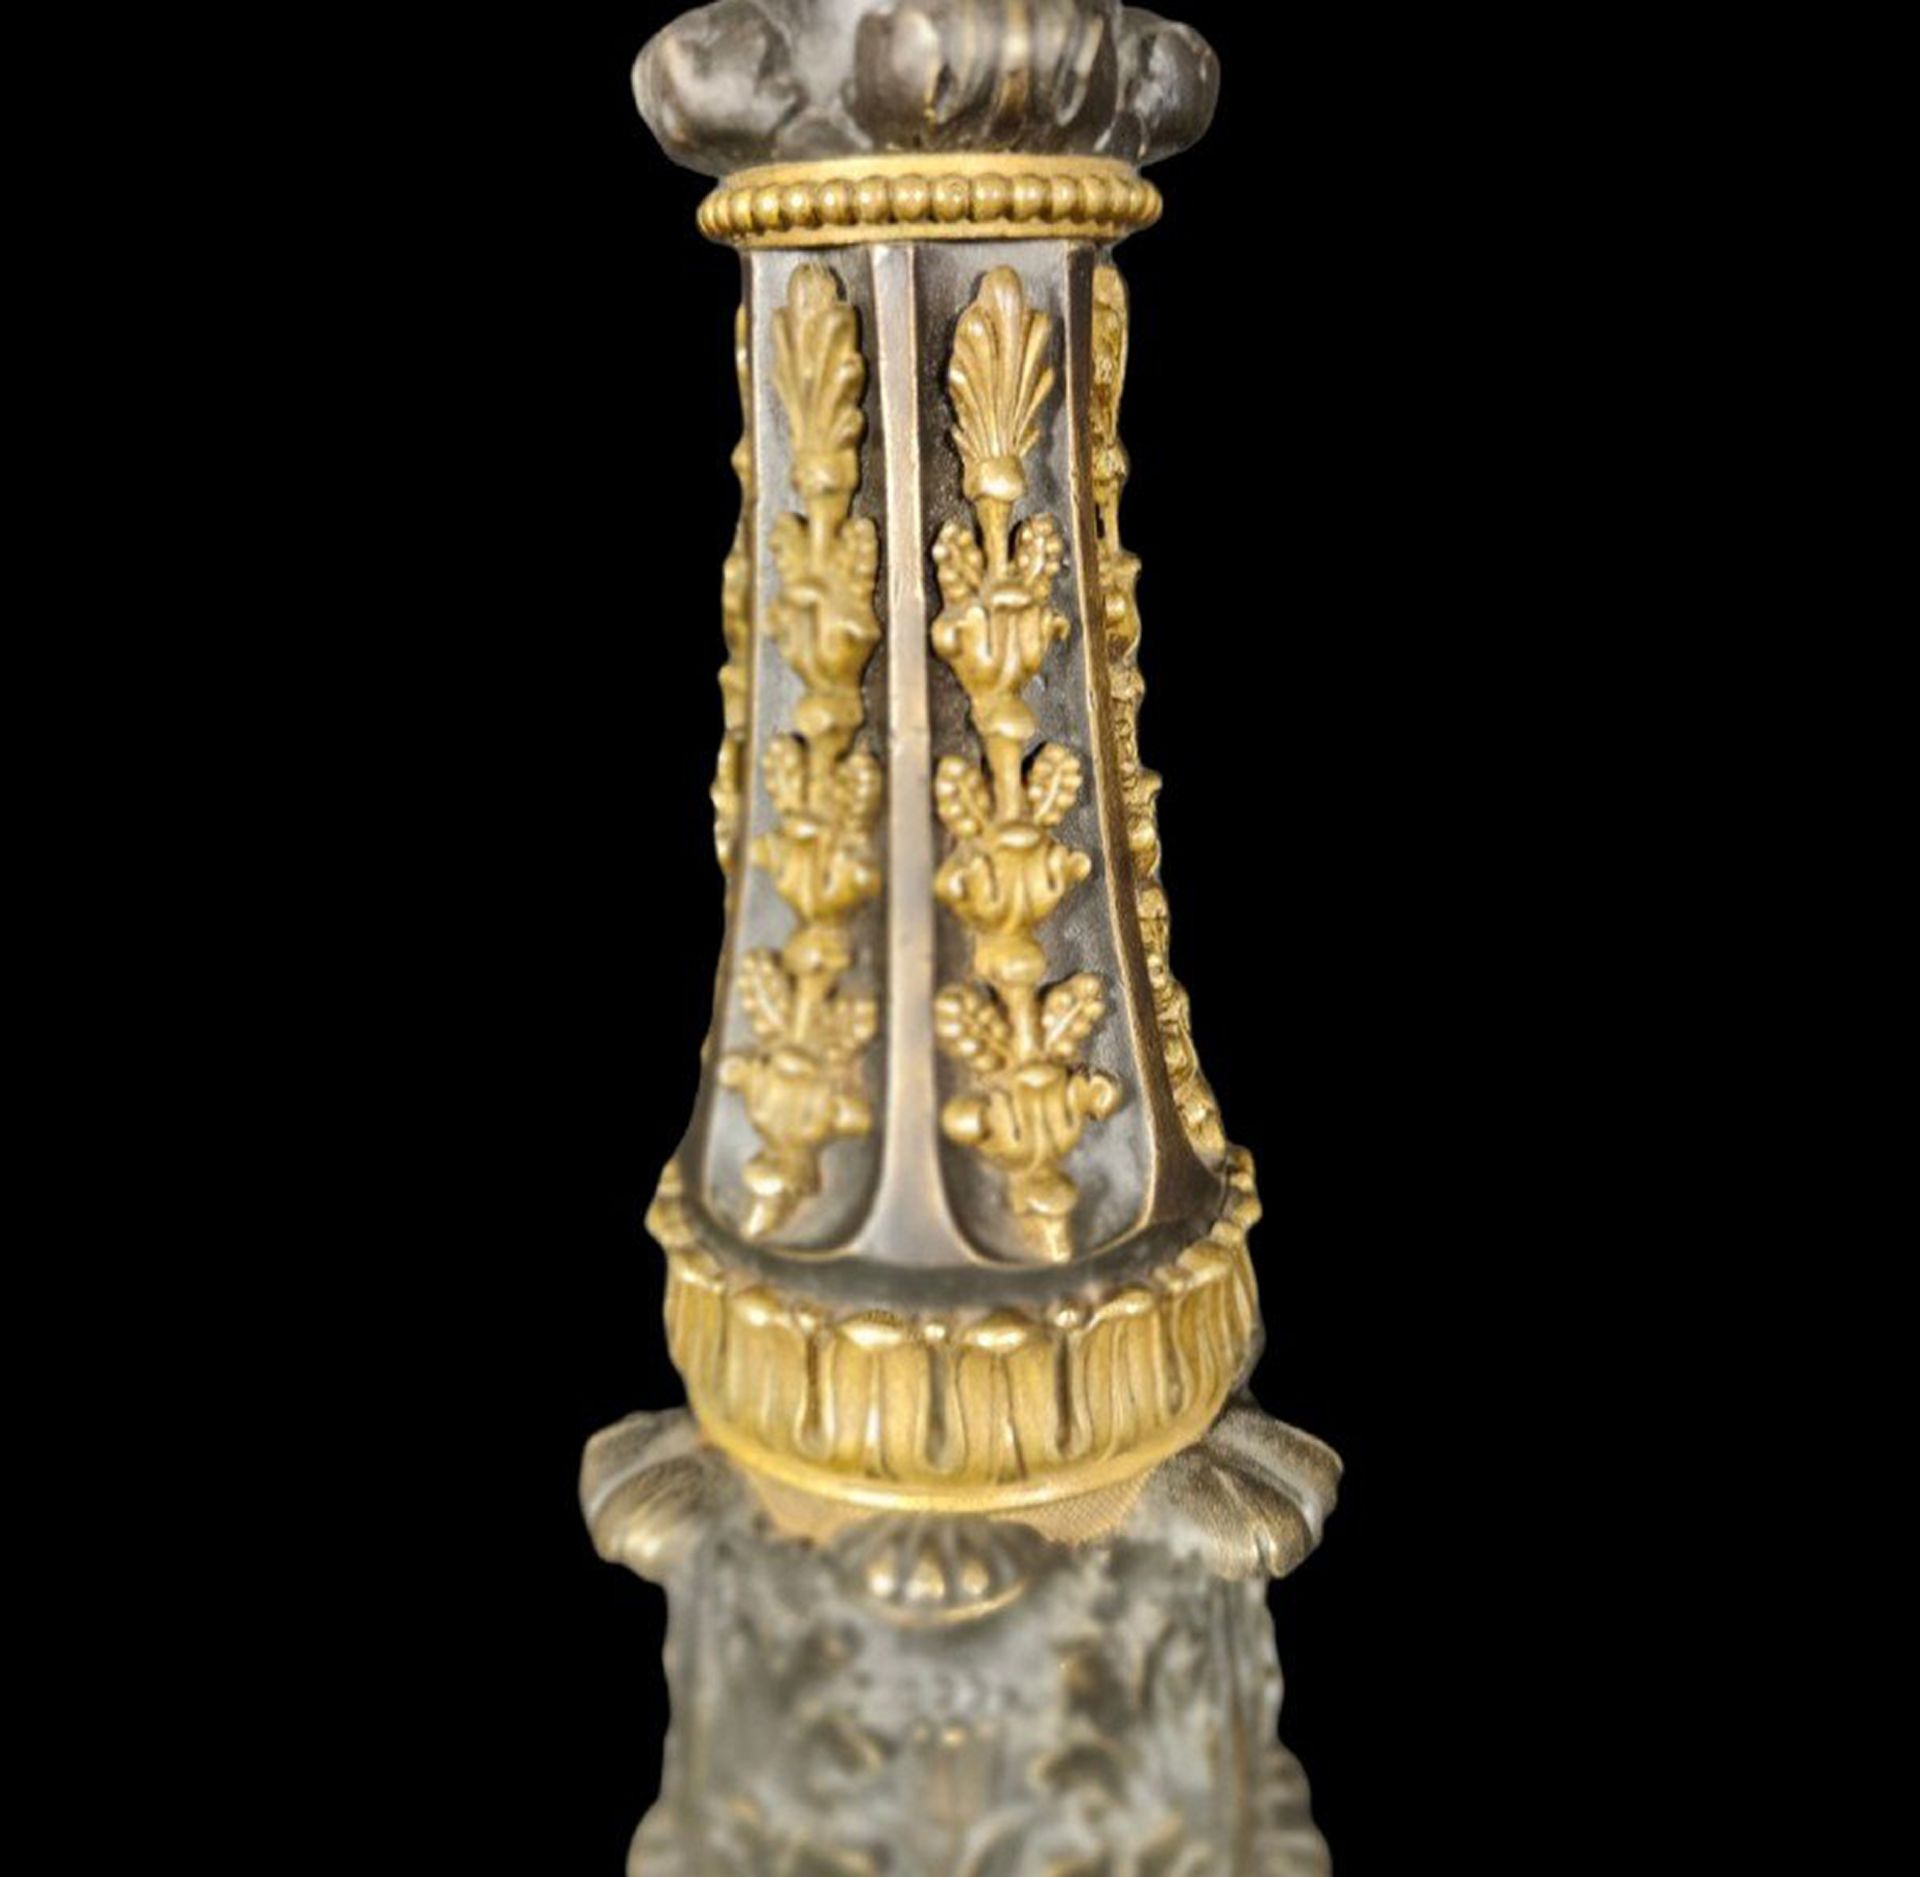 Pair of 19th century French candlesticks in gilt bronze - Image 8 of 10